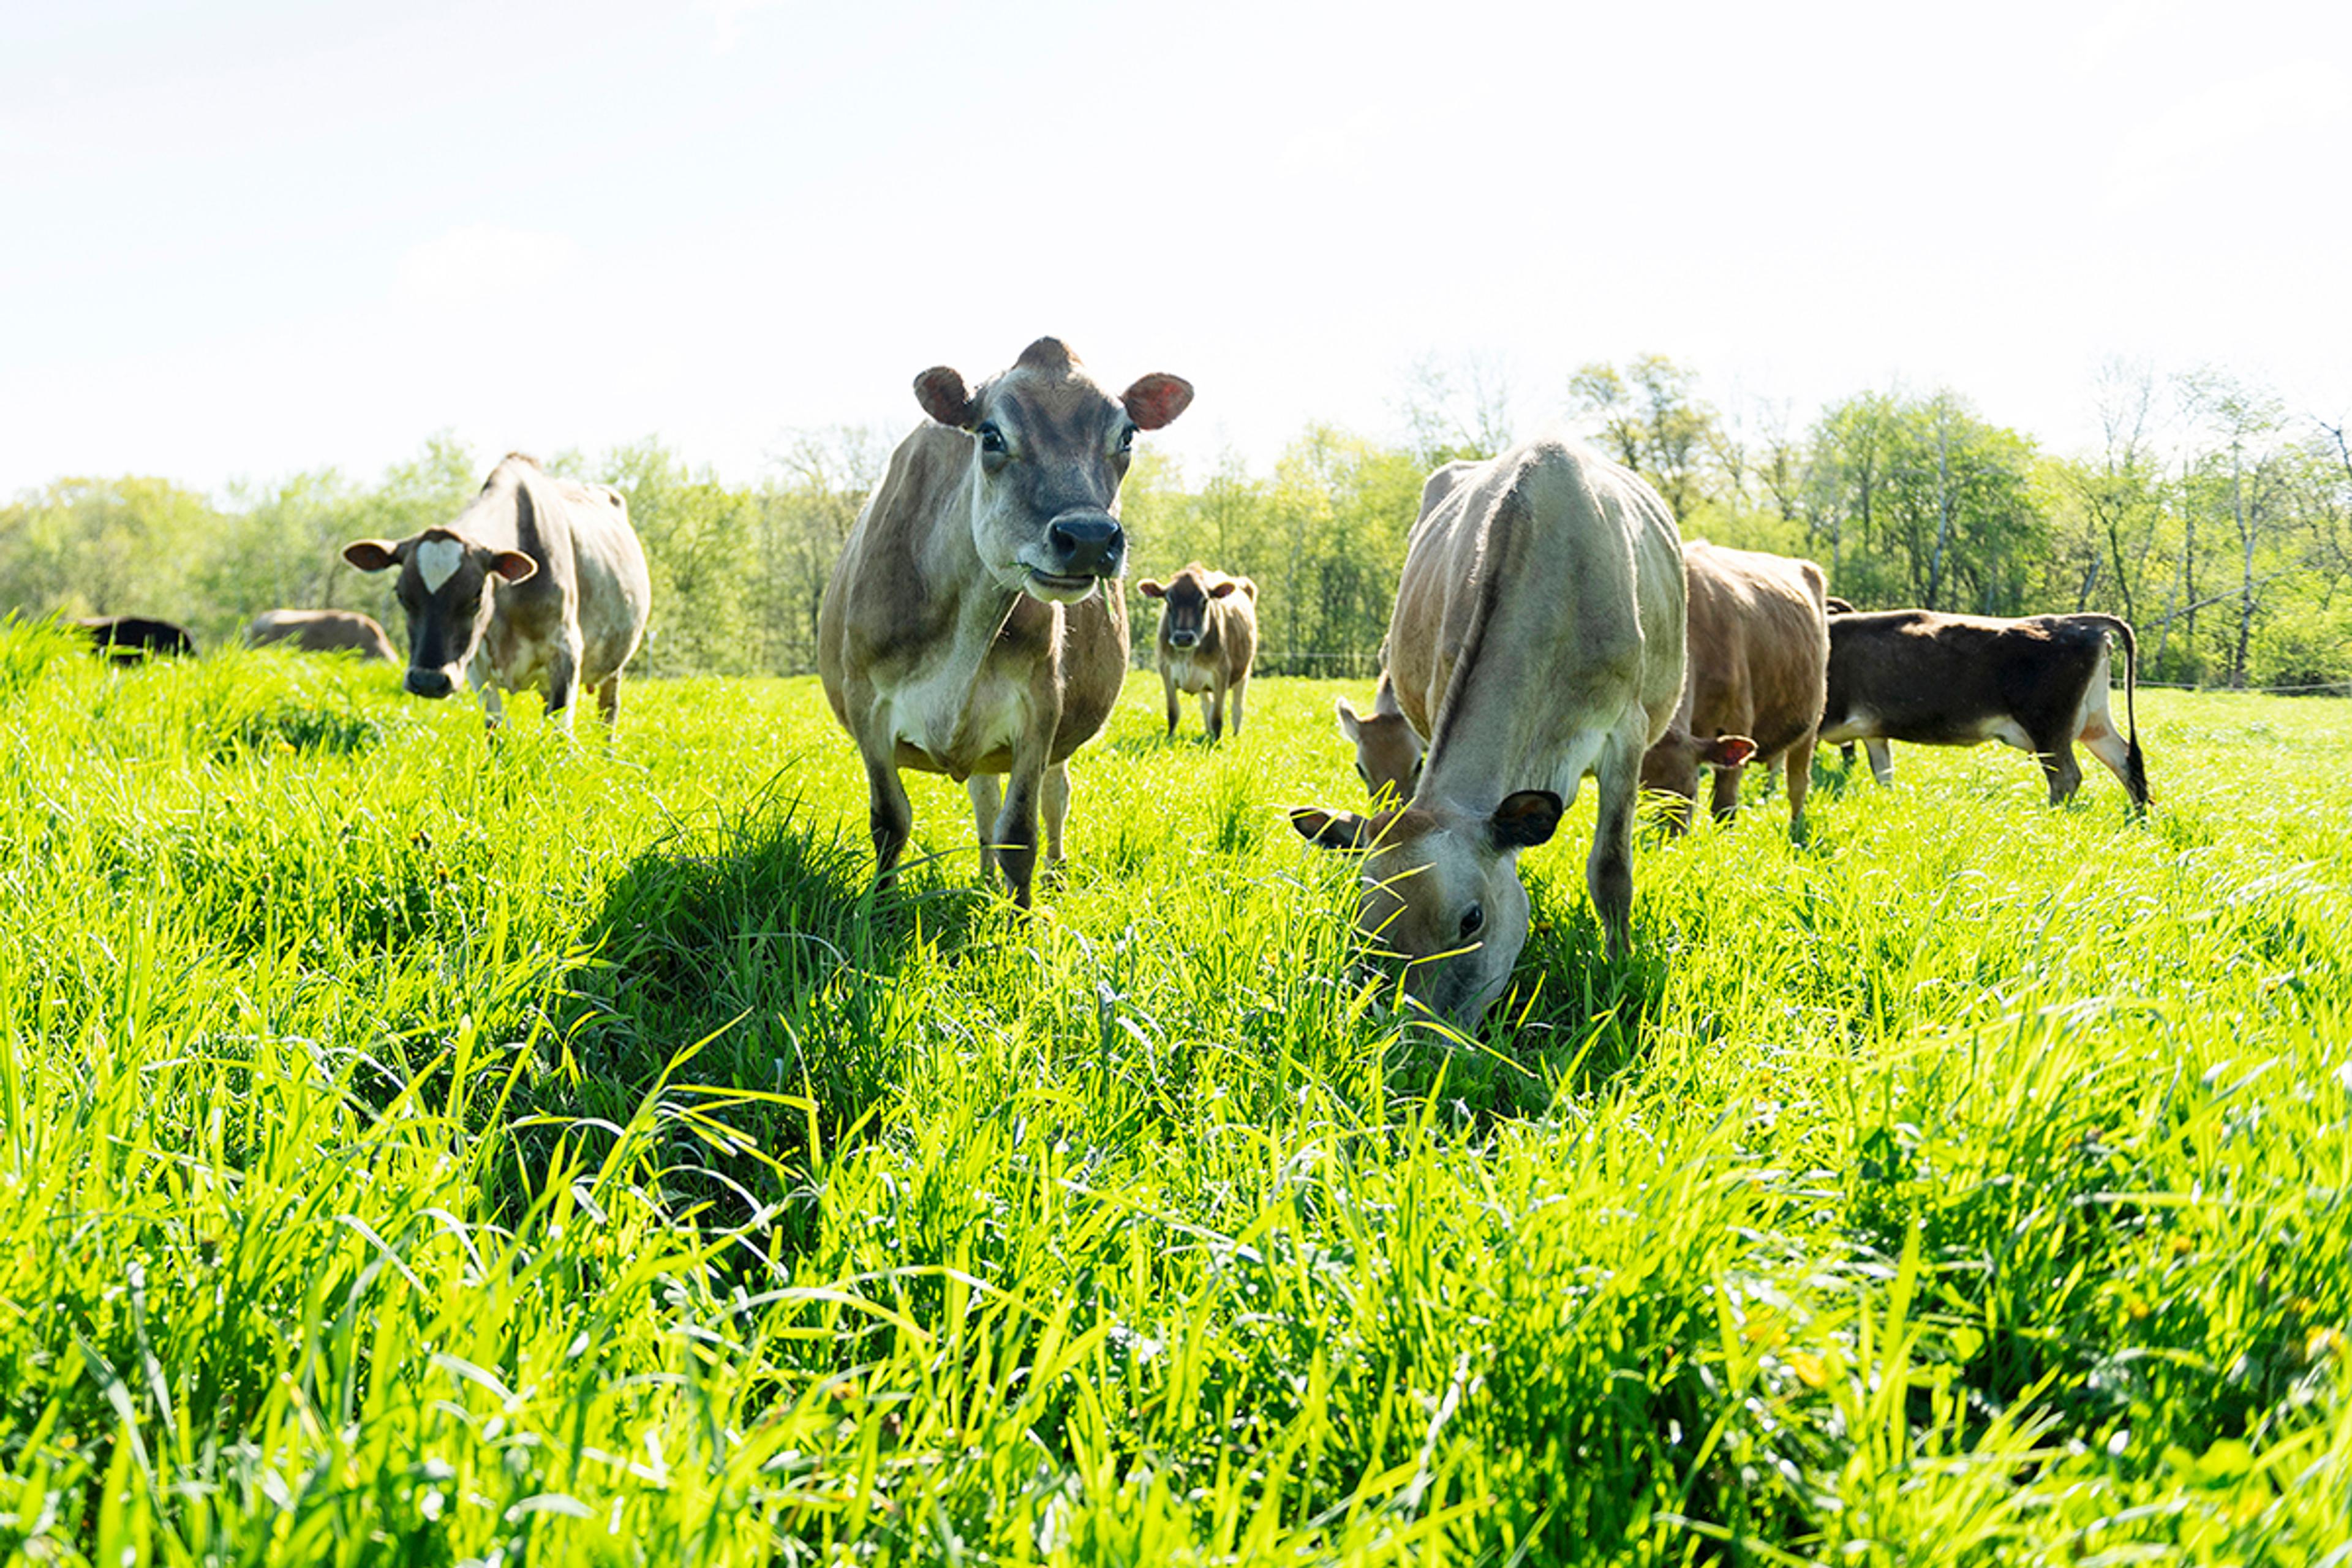 Cows graze happily on a green pasture at the Beard Farm in Iowa.